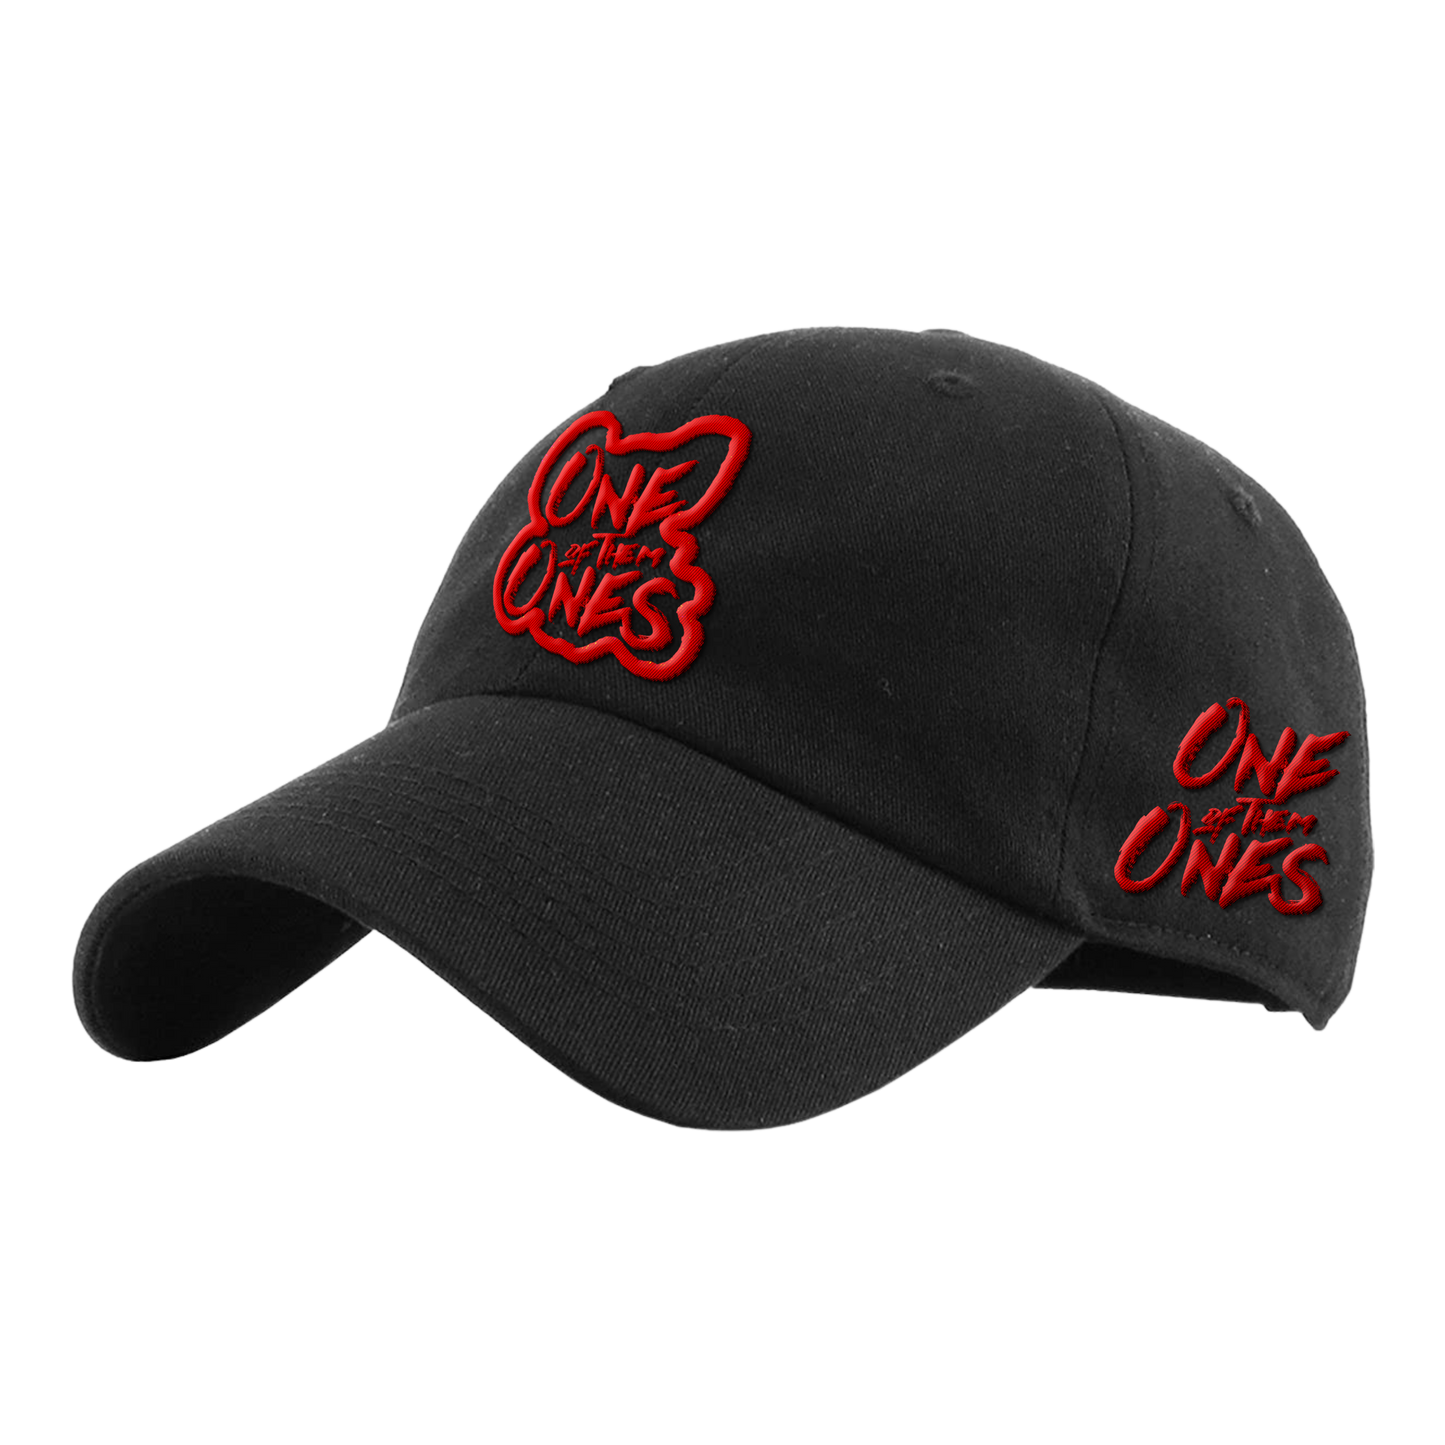 Organik Lyfestyle - 1OfThem1's OG Red Dad Hat W/Side Embroidery